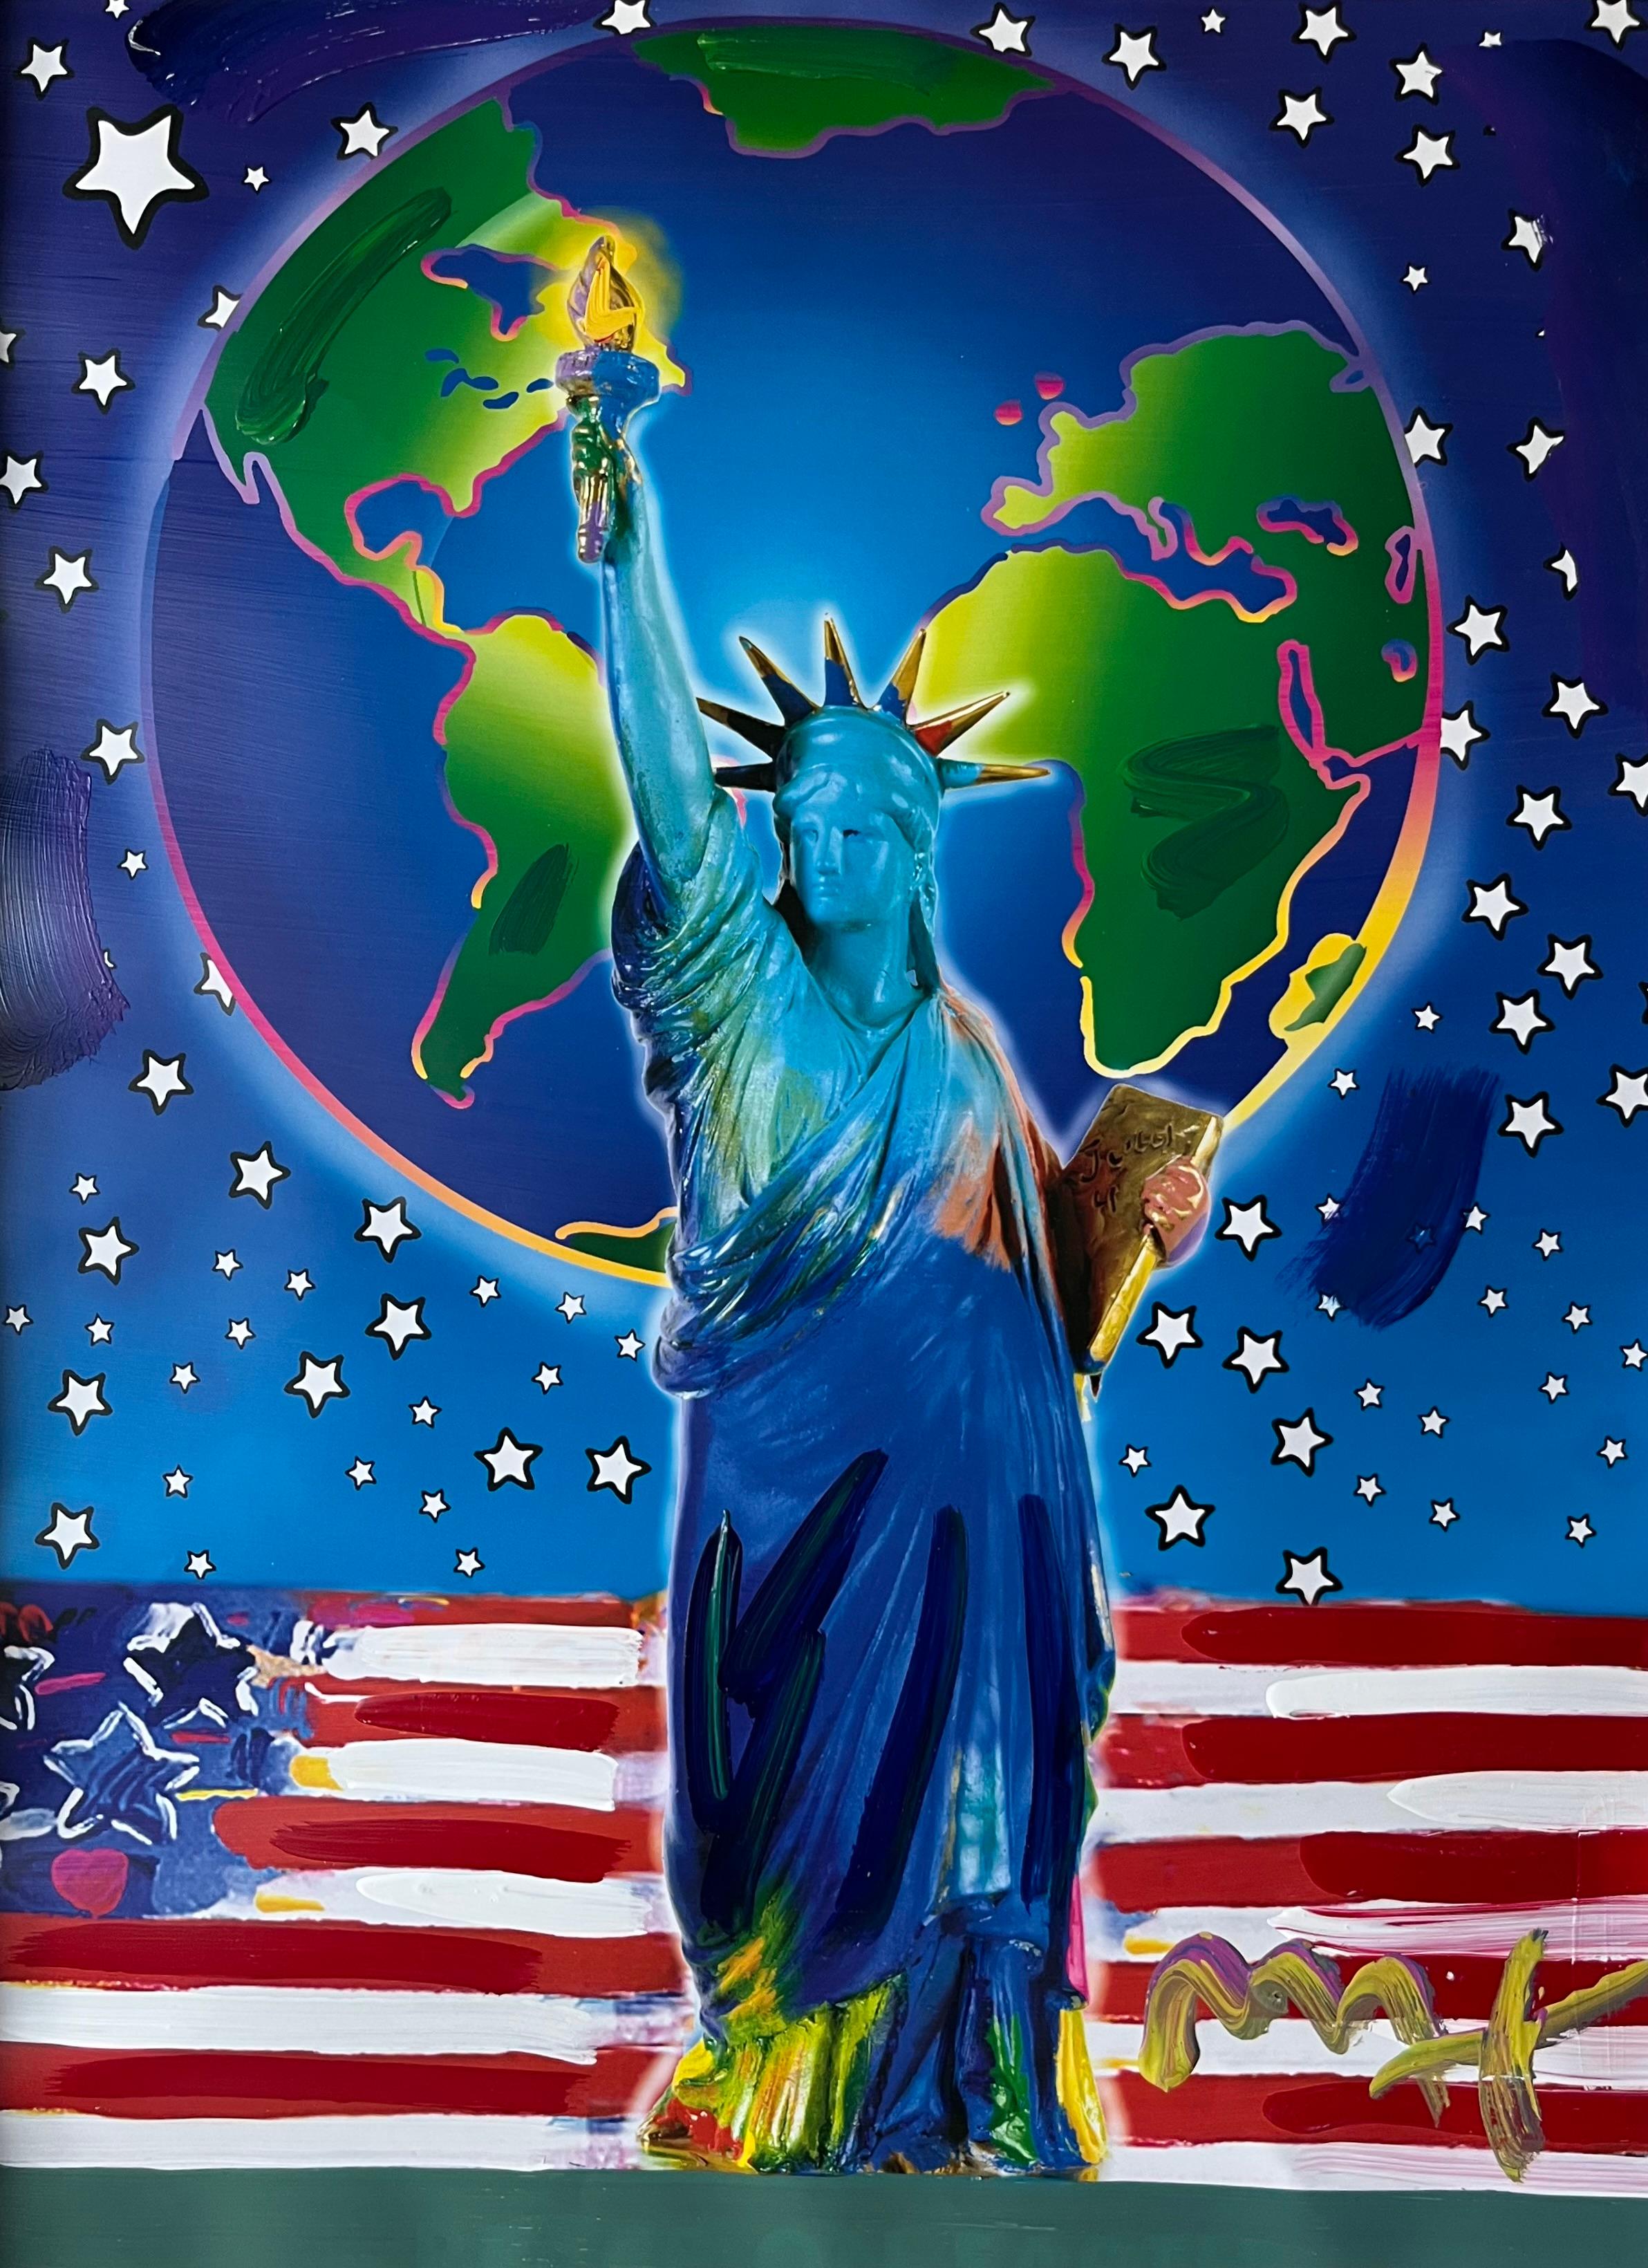 Peace on Earth - Art by Peter Max